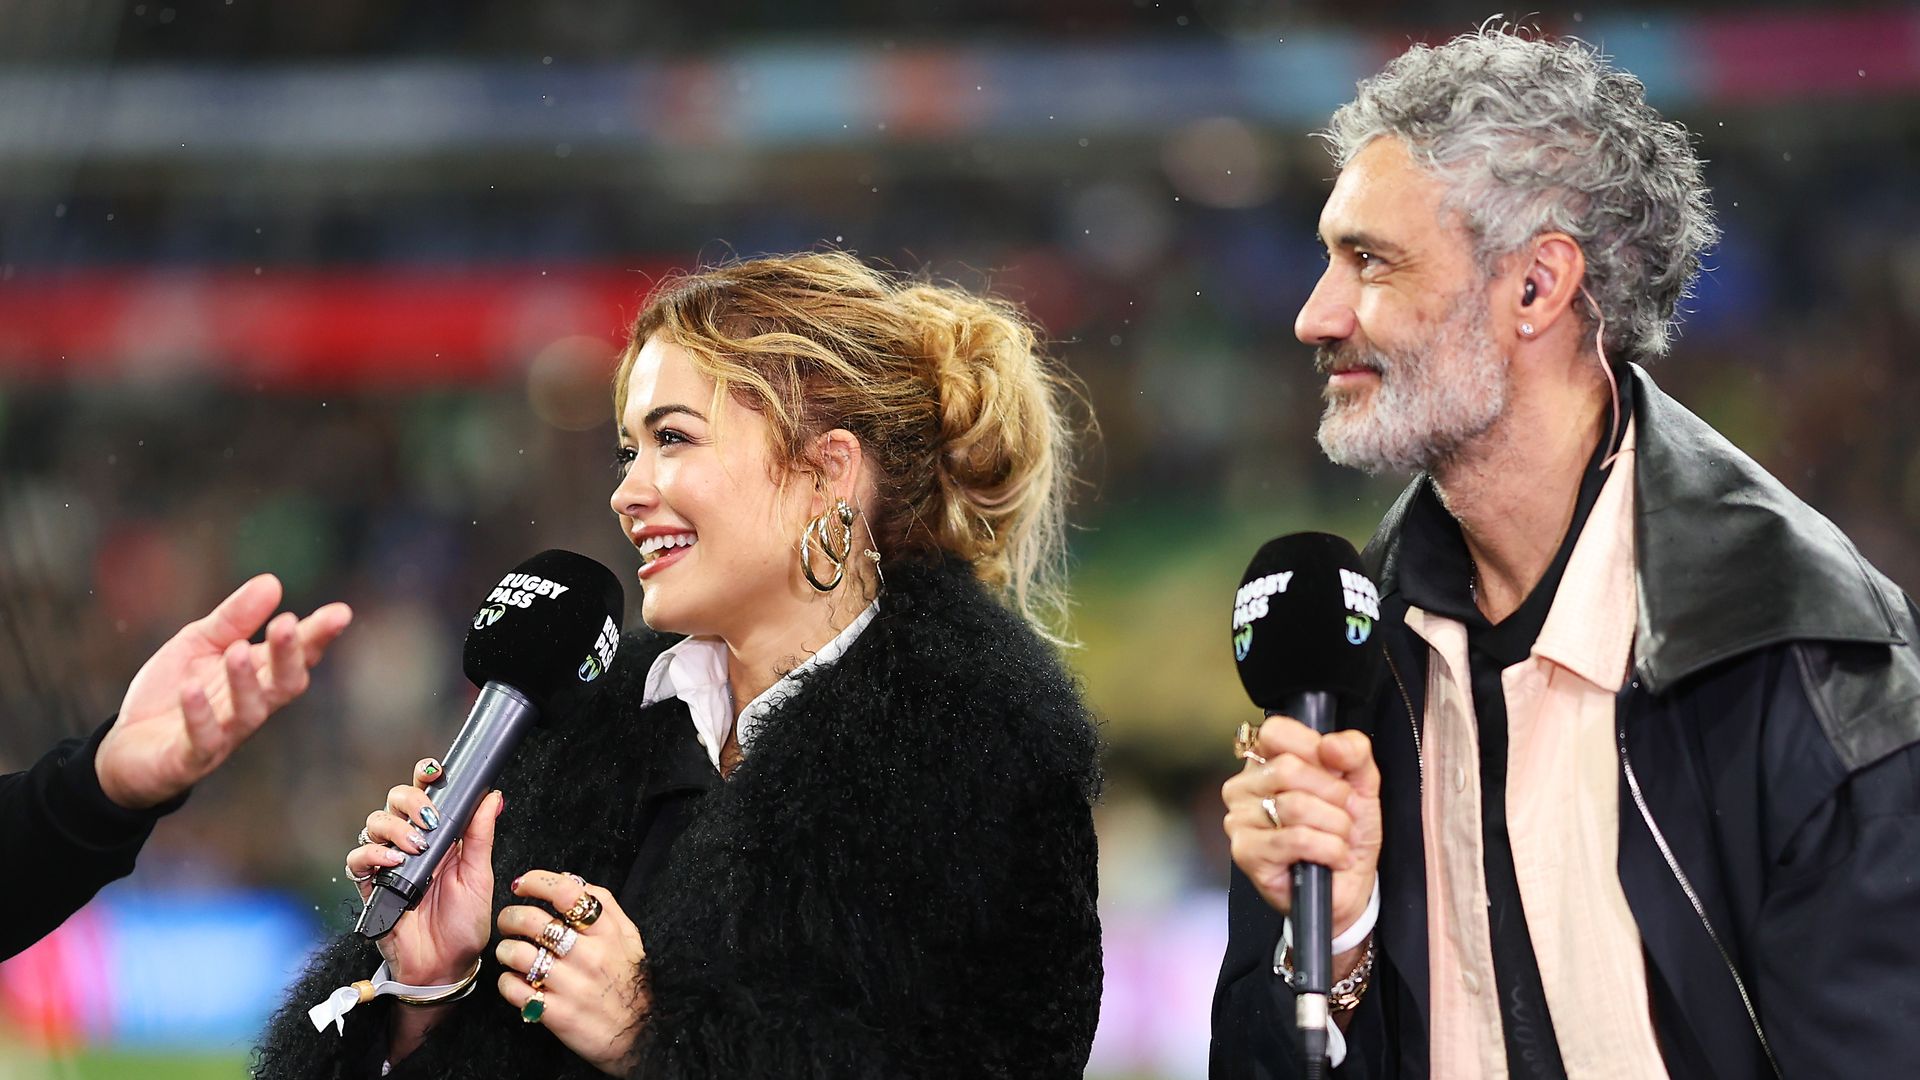 Rita Ora and Taika Waititi being interviewed at the Rugby World Cup